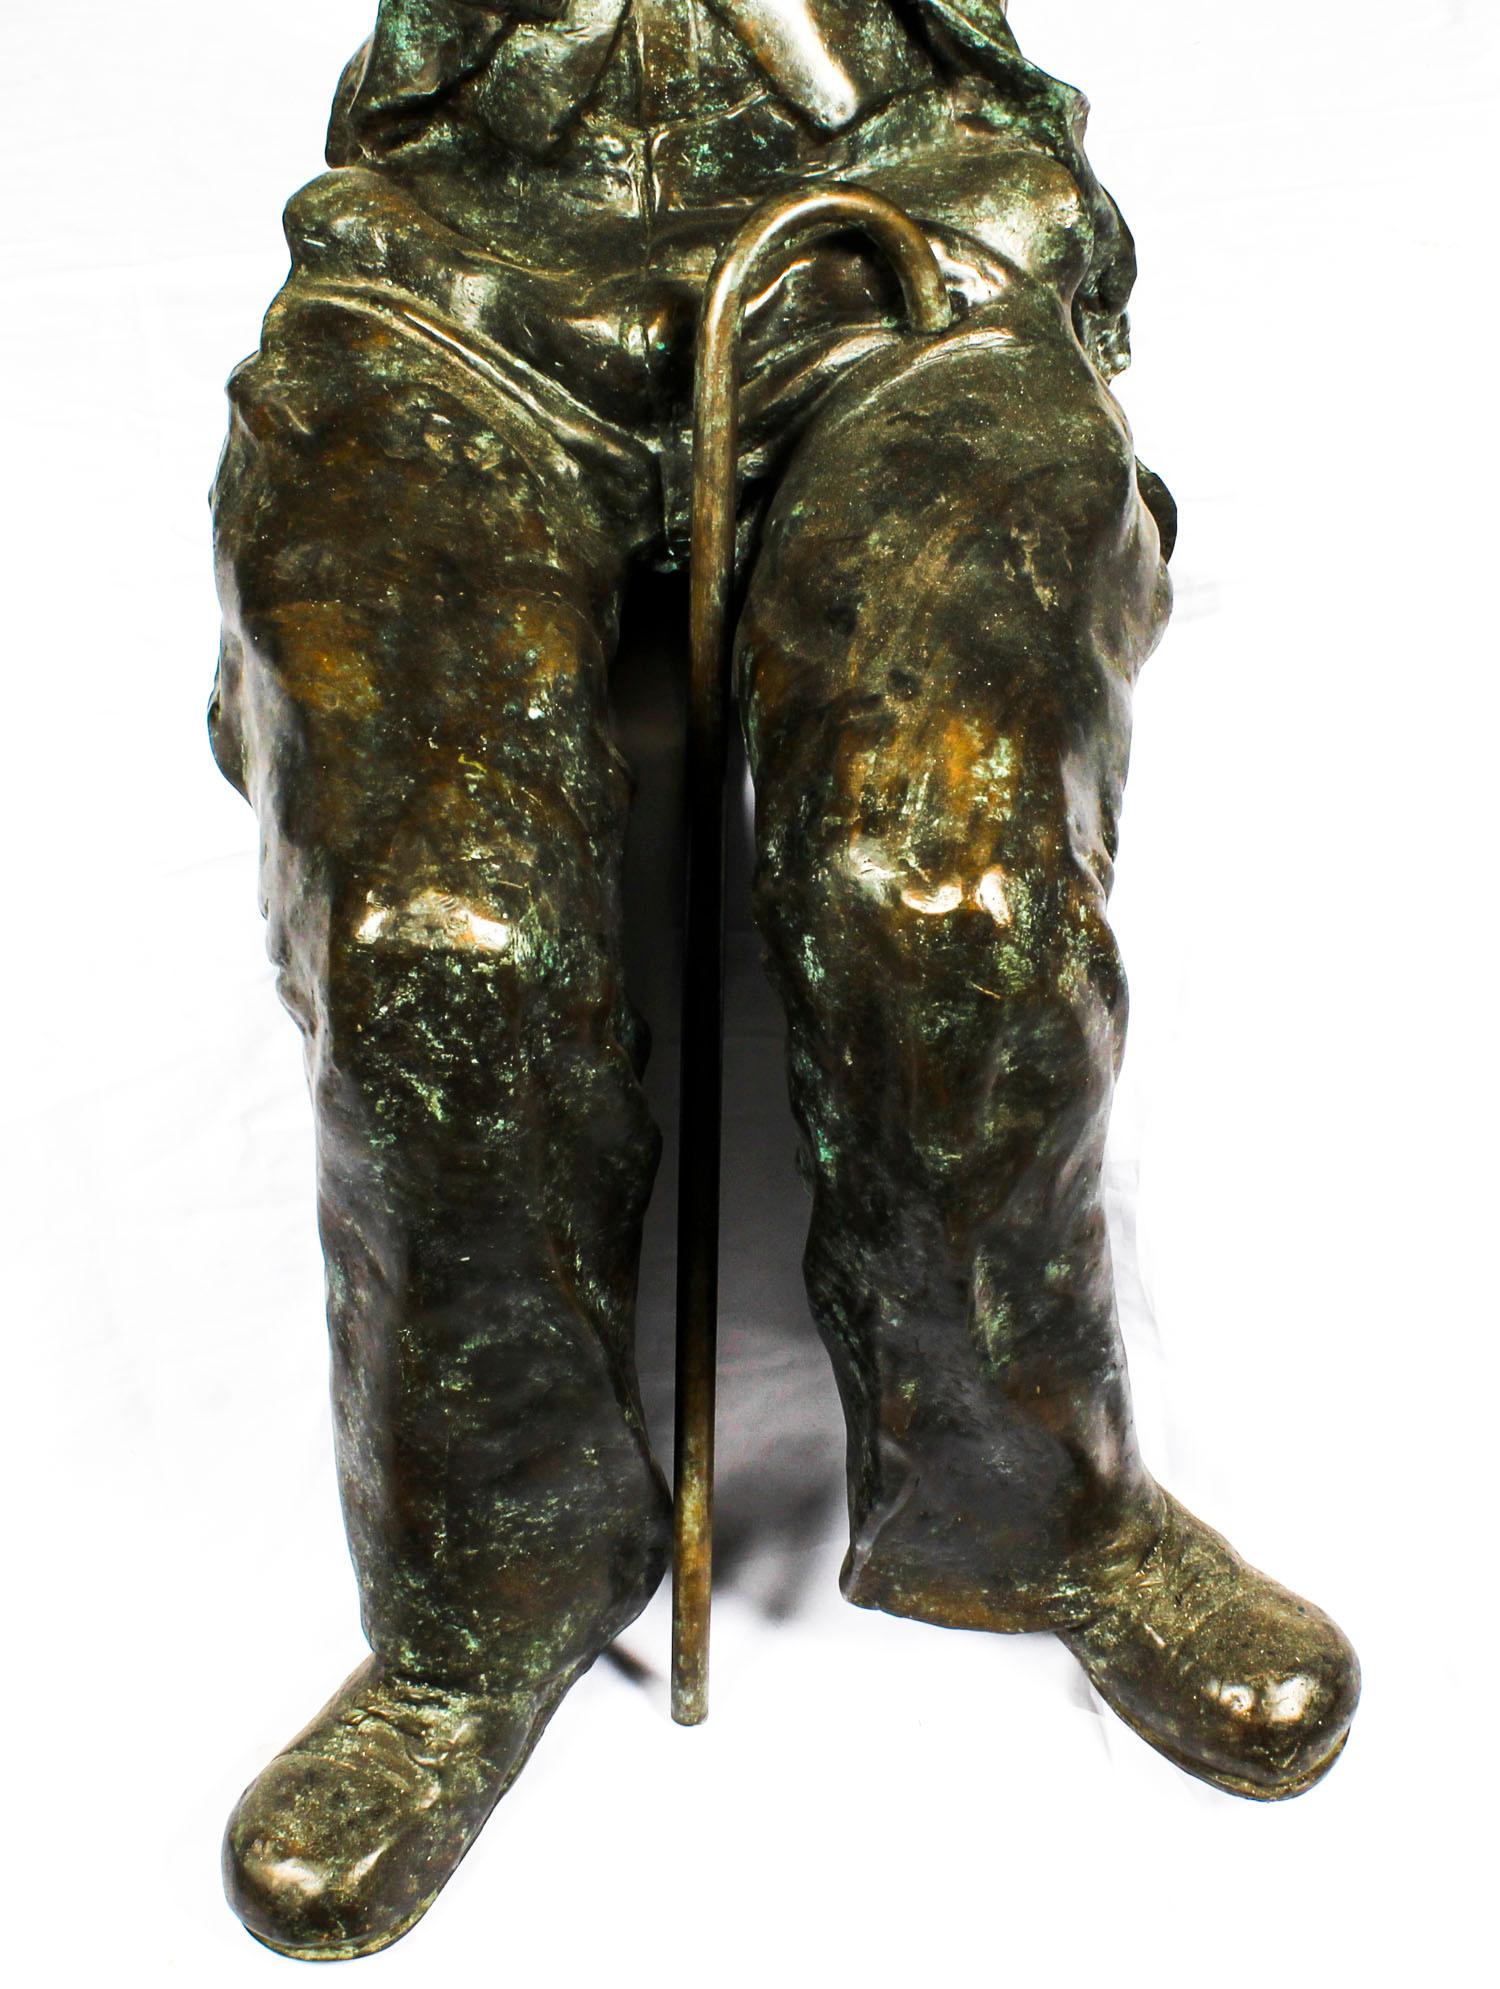 Vintage Lifesize Bronze Sculpture of Seated Charlie Chaplin 20th Century For Sale 5